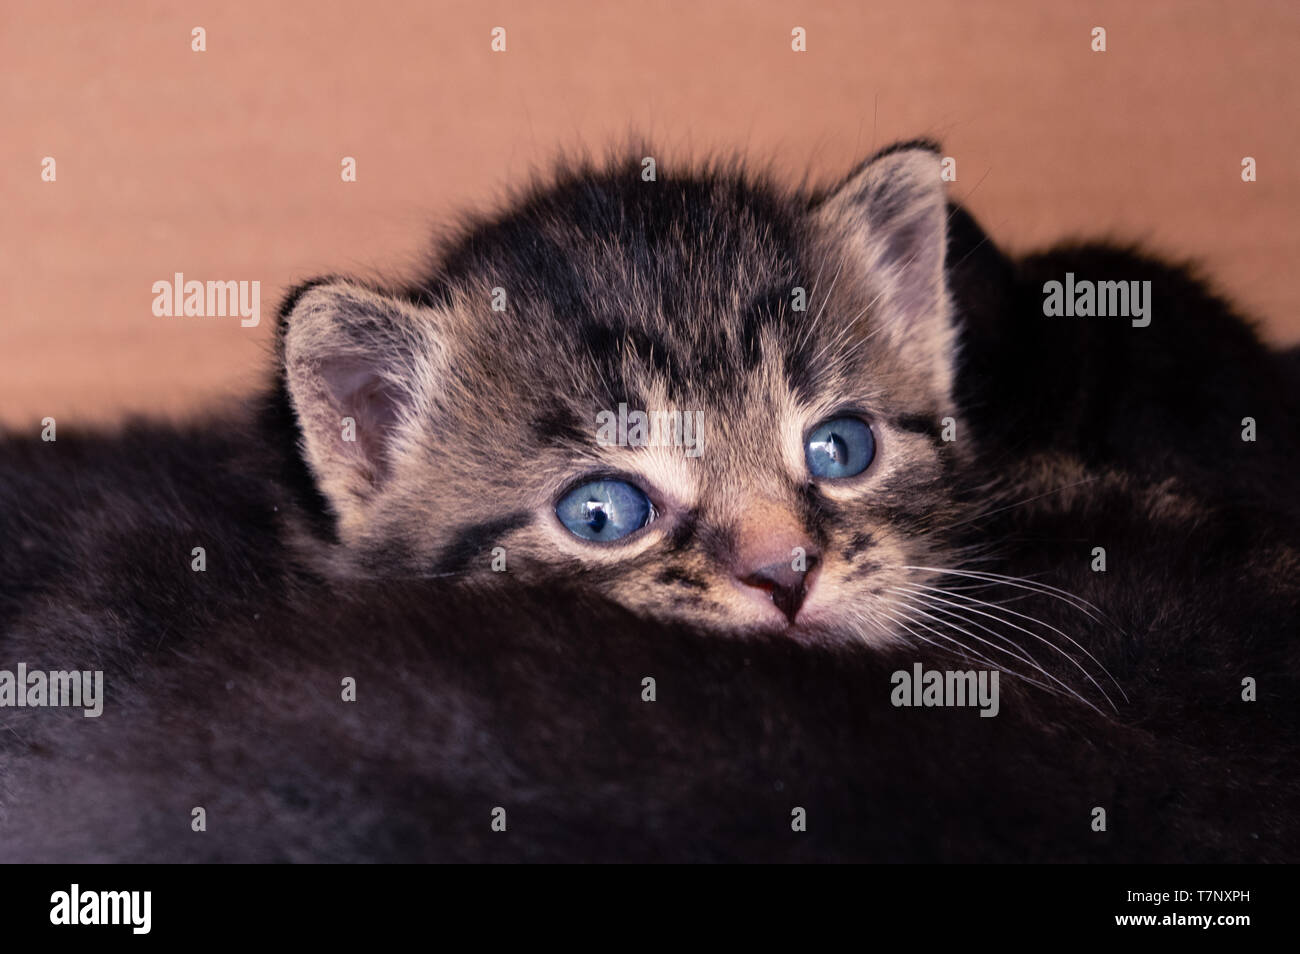 tabby baby kitten watching while cuddled together with its siblings Stock Photo